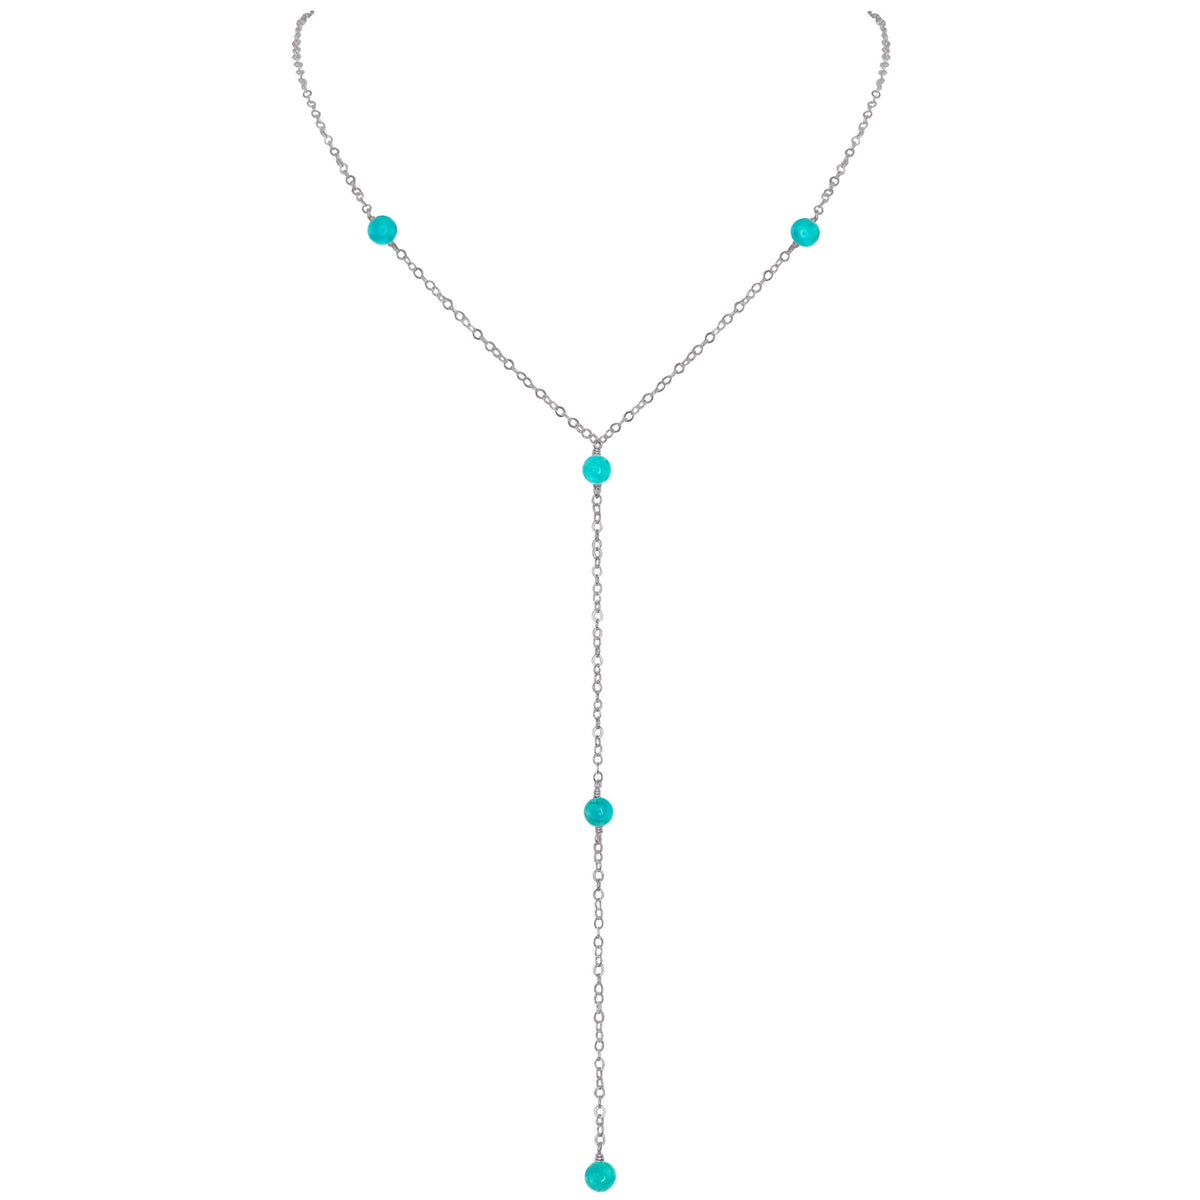 Dainty Y Necklace - Turquoise - Stainless Steel - Luna Tide Handmade Jewellery